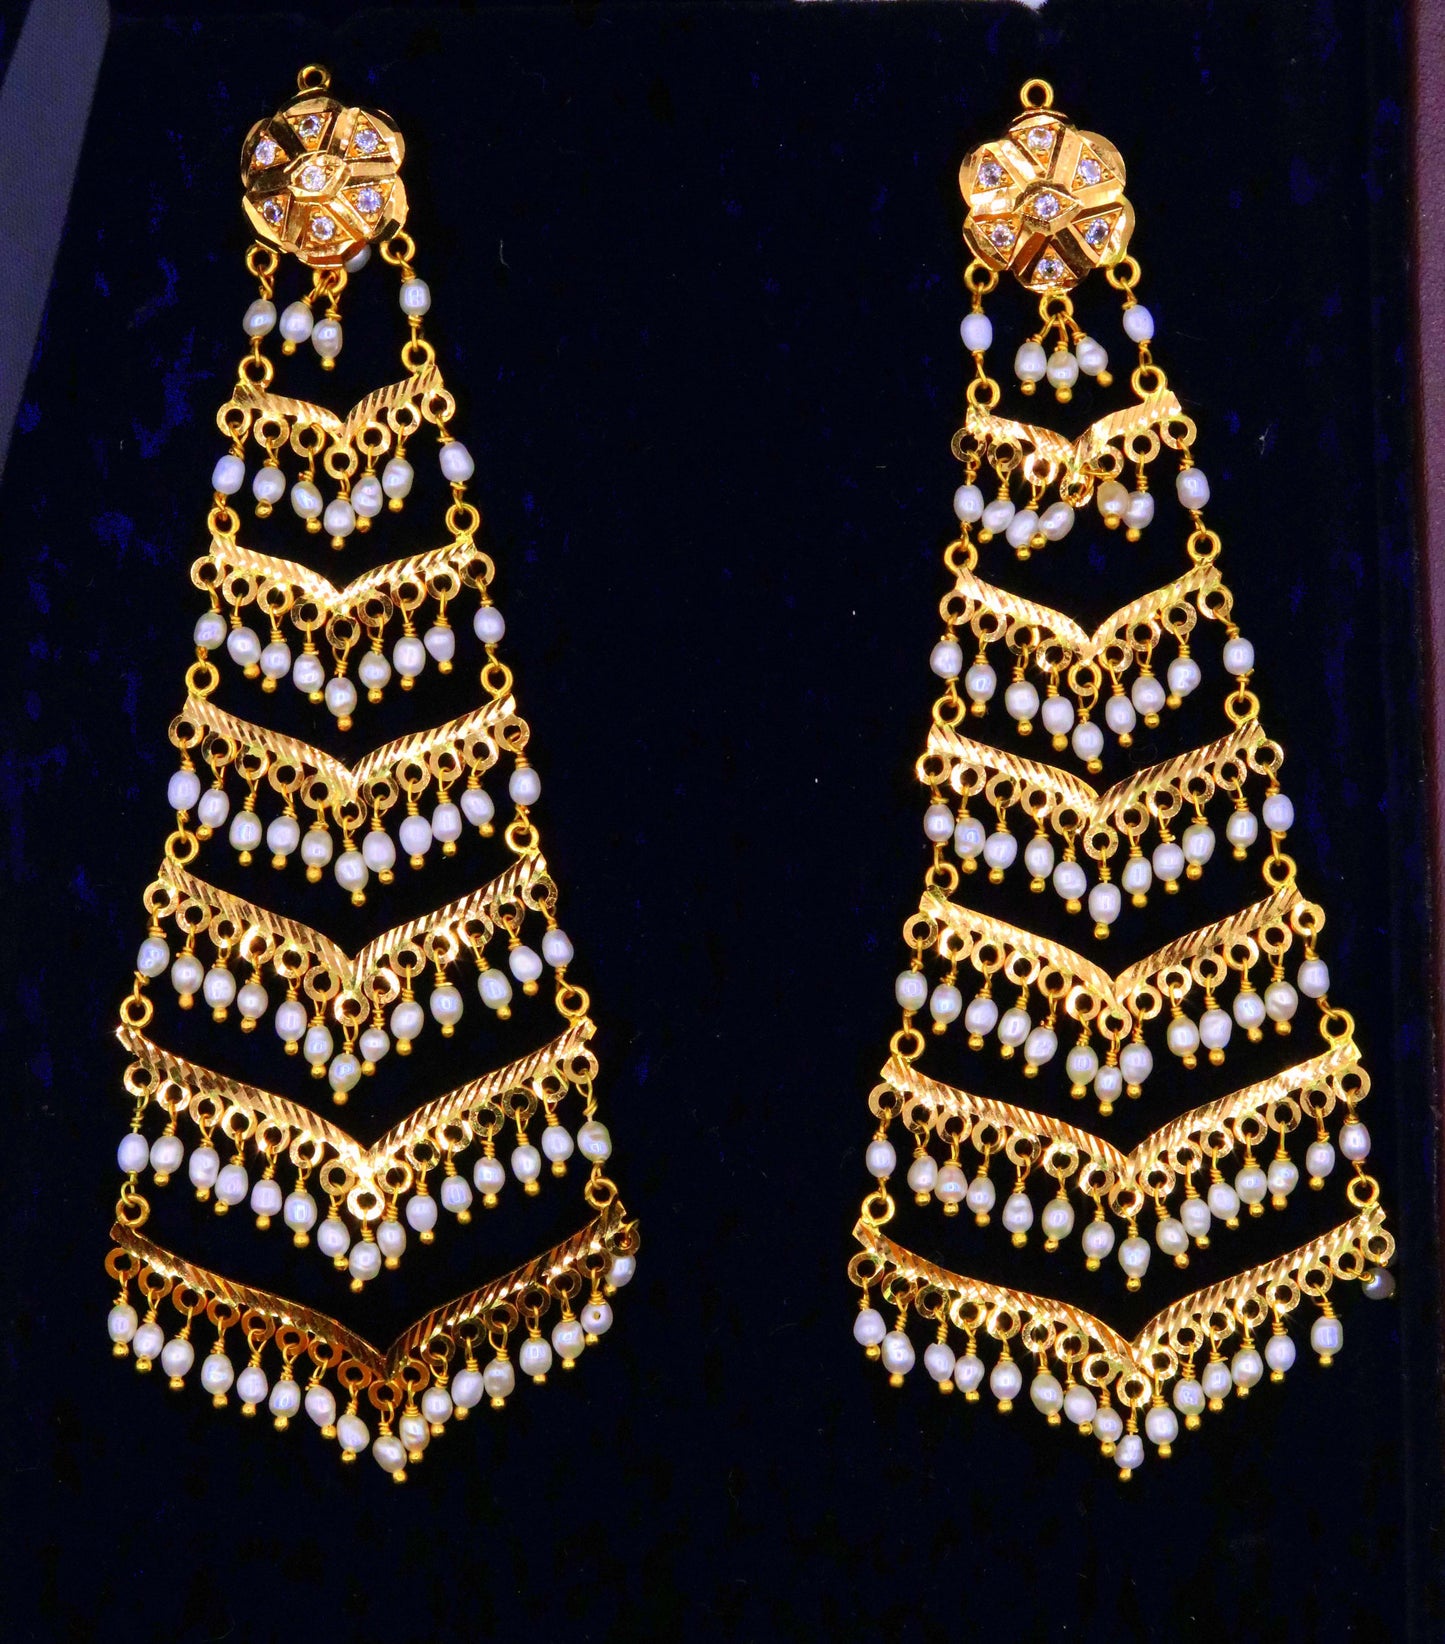 Fabulous handmade bridal dangling earring indian bollywood style punjabi muslim women's gorgeous chandelier with dangling pearl jewelry - TRIBAL ORNAMENTS